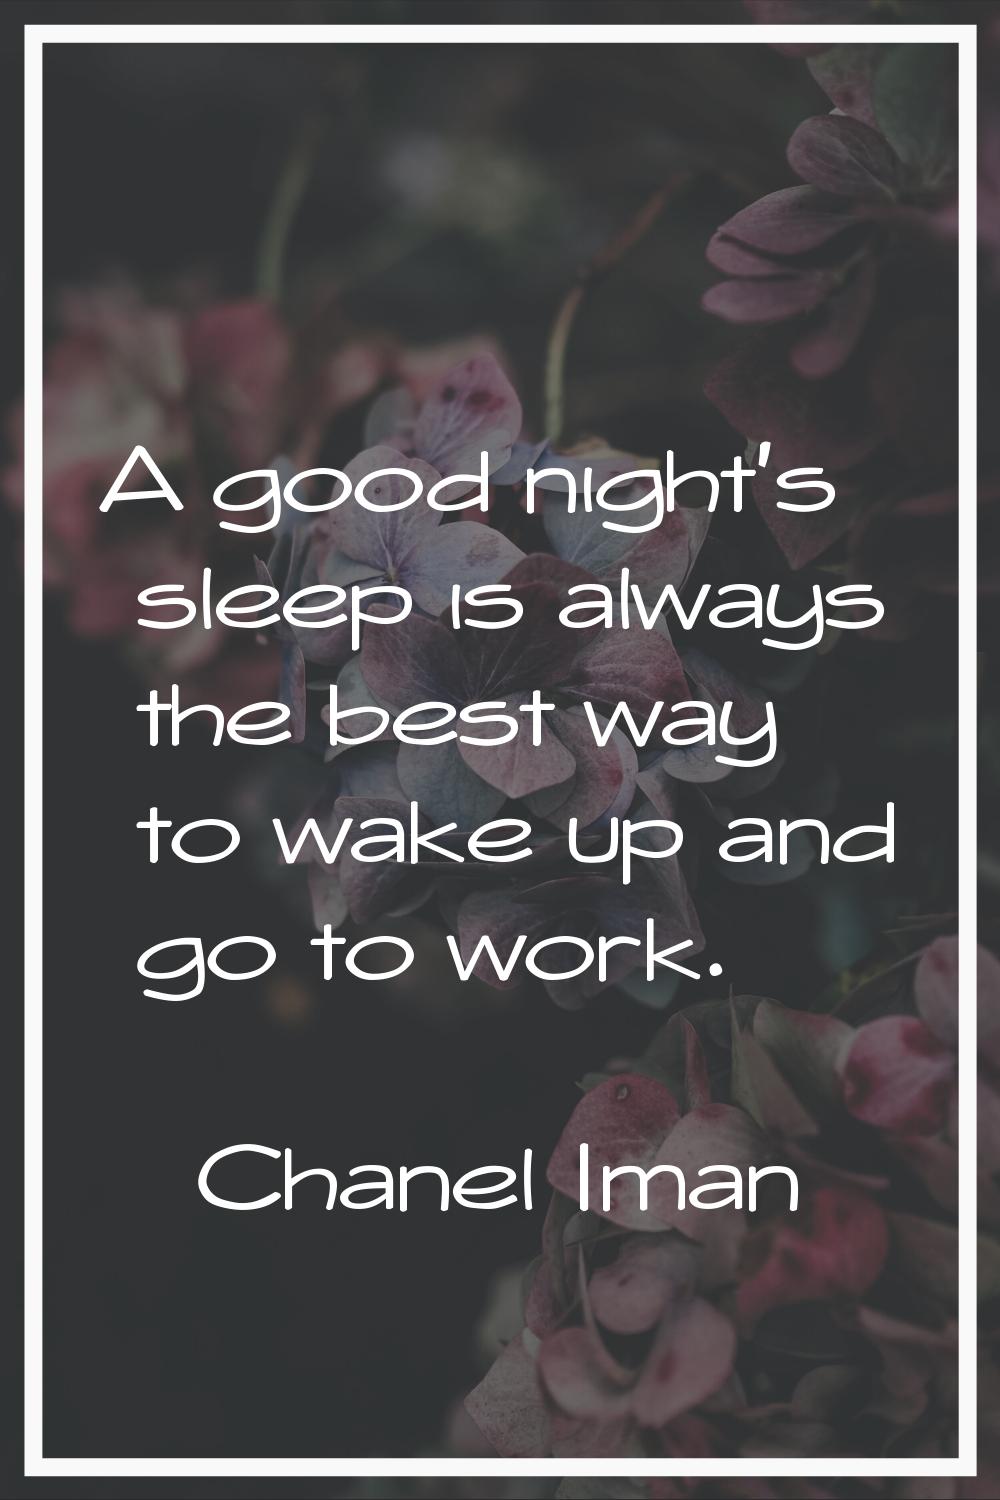 A good night's sleep is always the best way to wake up and go to work.